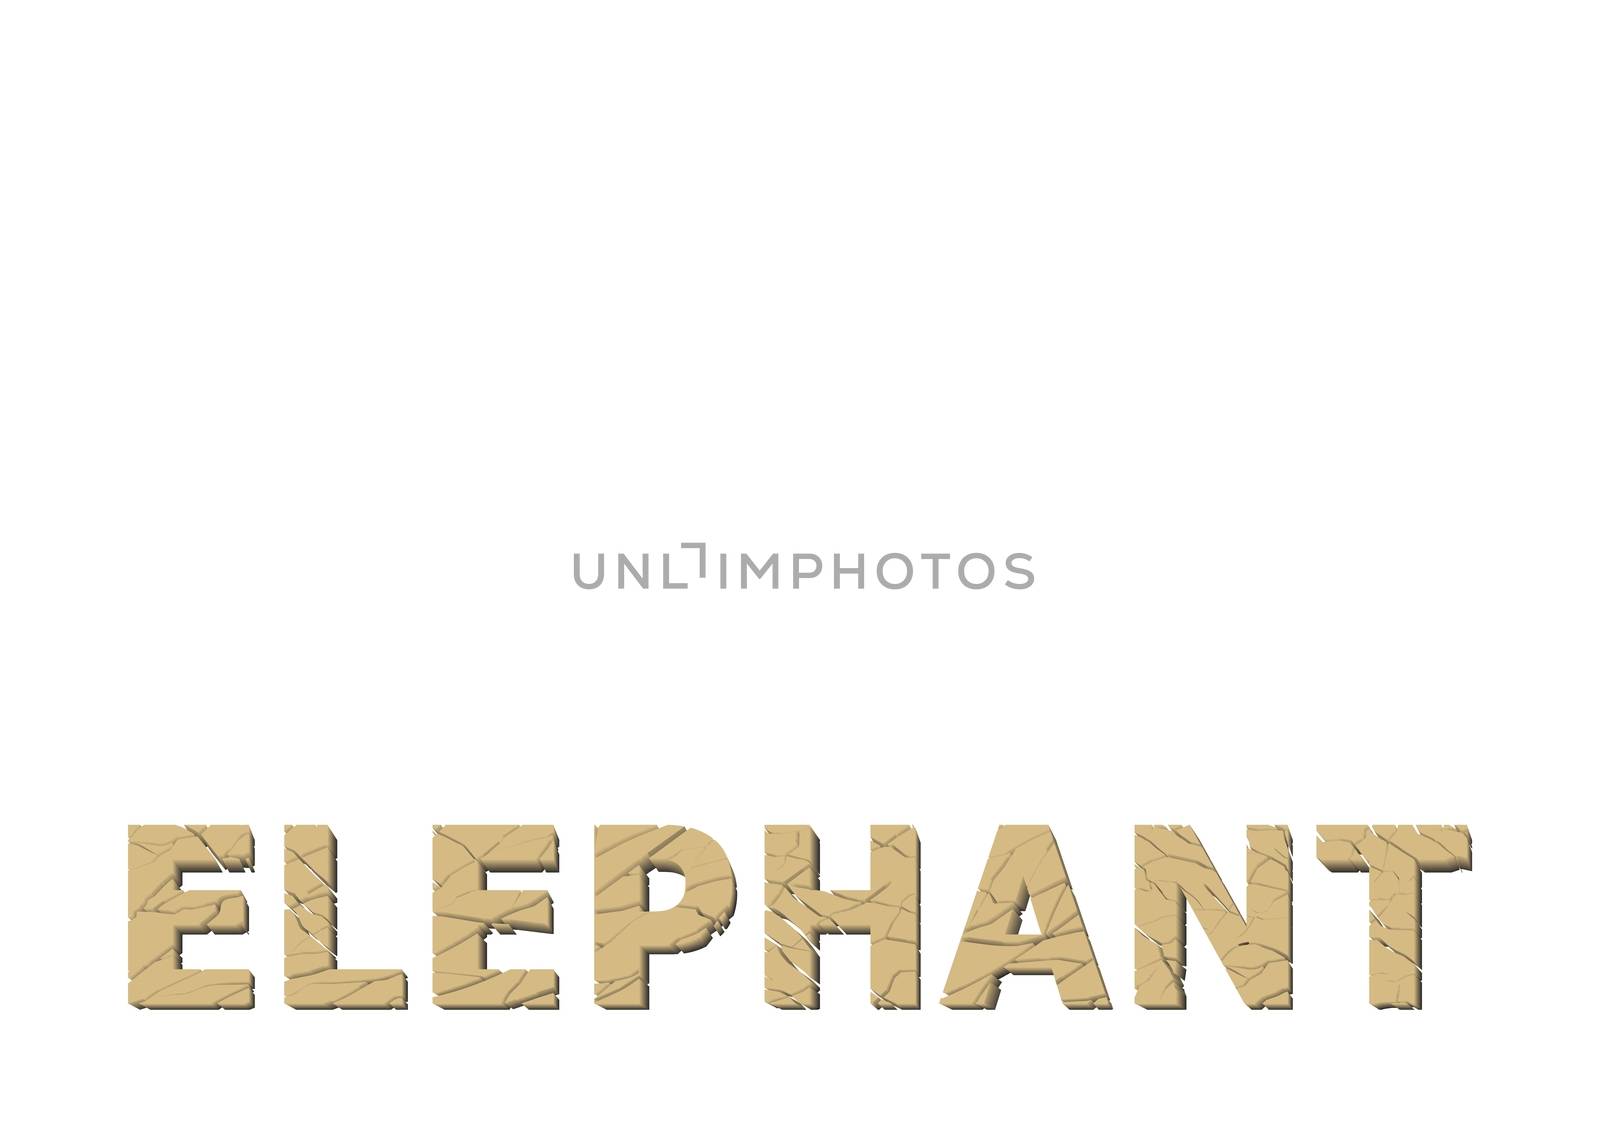 Elephant texture in the text by ard1